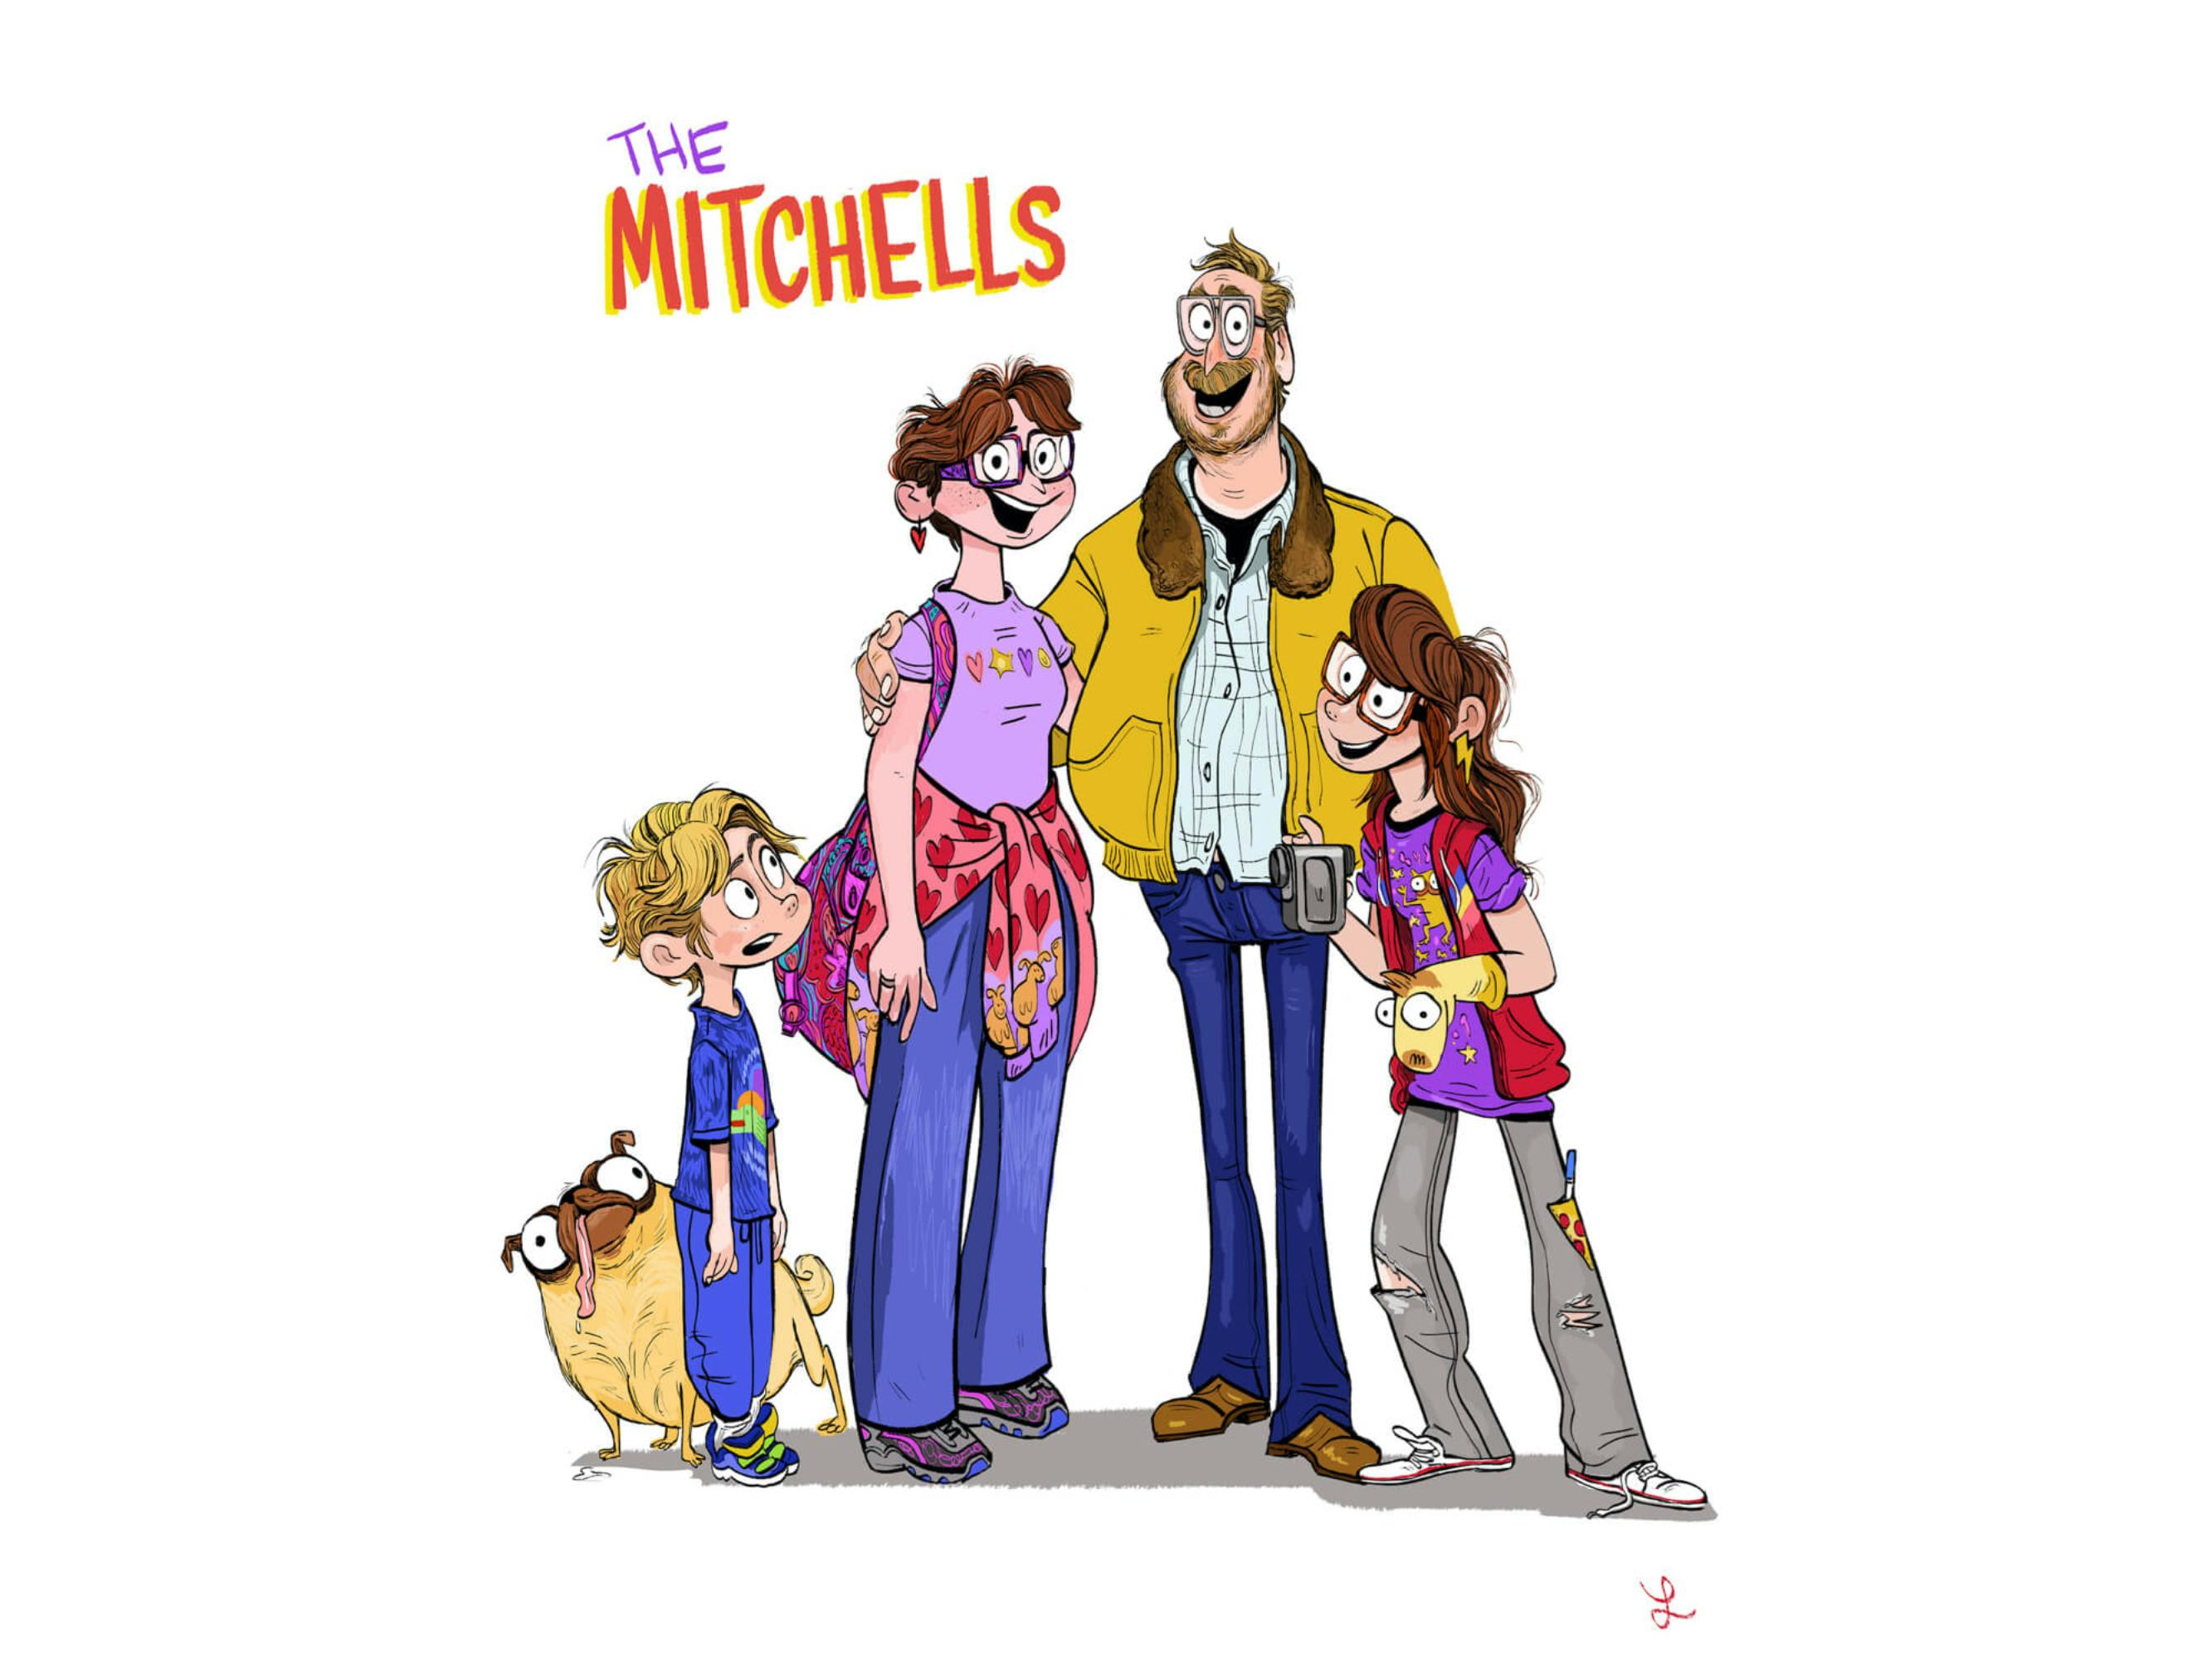 The Mitchells stand together smiling. From left to right: Monchi’s tongue hangs out of his mouth, Aaron wears matching blue sweatpants and a tshirt, Linda wears jeans, sneakers, a purple t-shirt and a pink sweater tied around her waist, Rick wears his classic seventies fit of tight flare jeans and yellow Carhart-esque jacket, and Katie wears ripped grey jeans, holds a camcorder and a sock puppet.